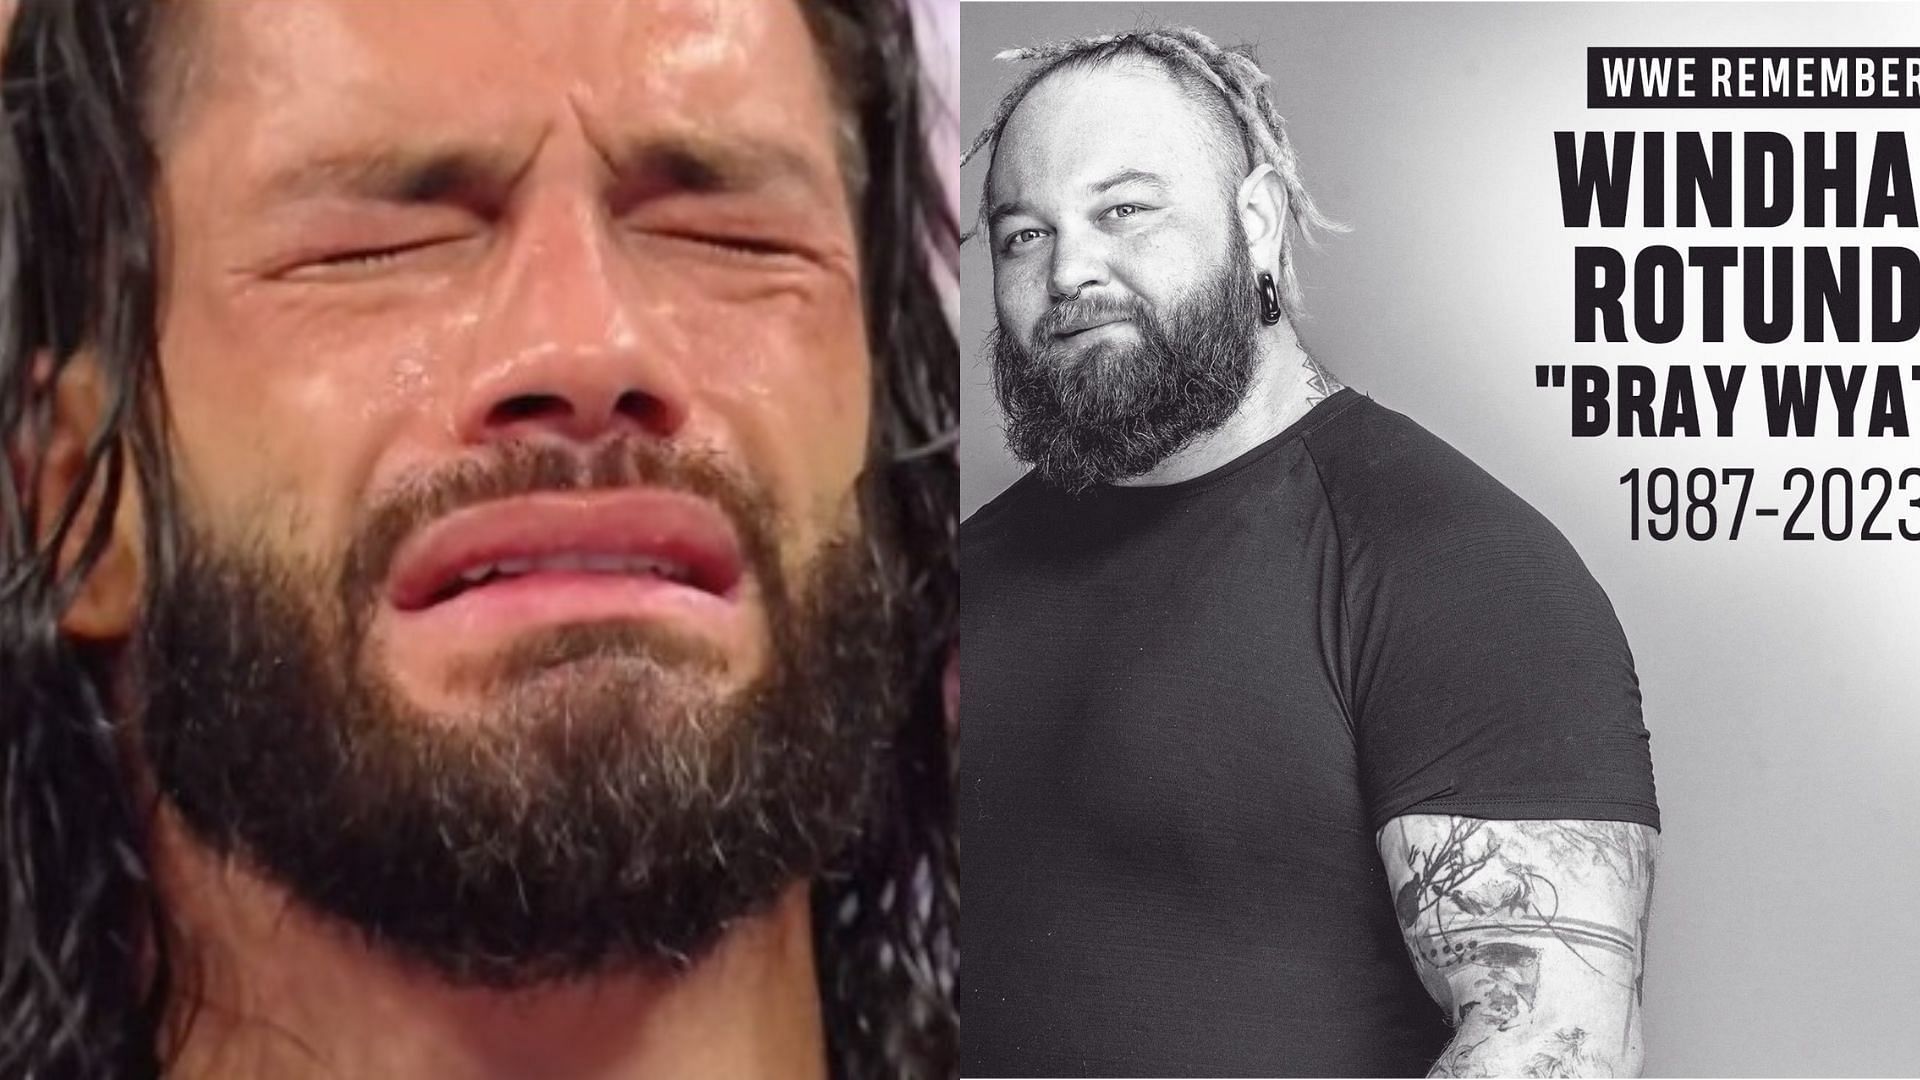 The tributes have continued for the late Bray Wyatt